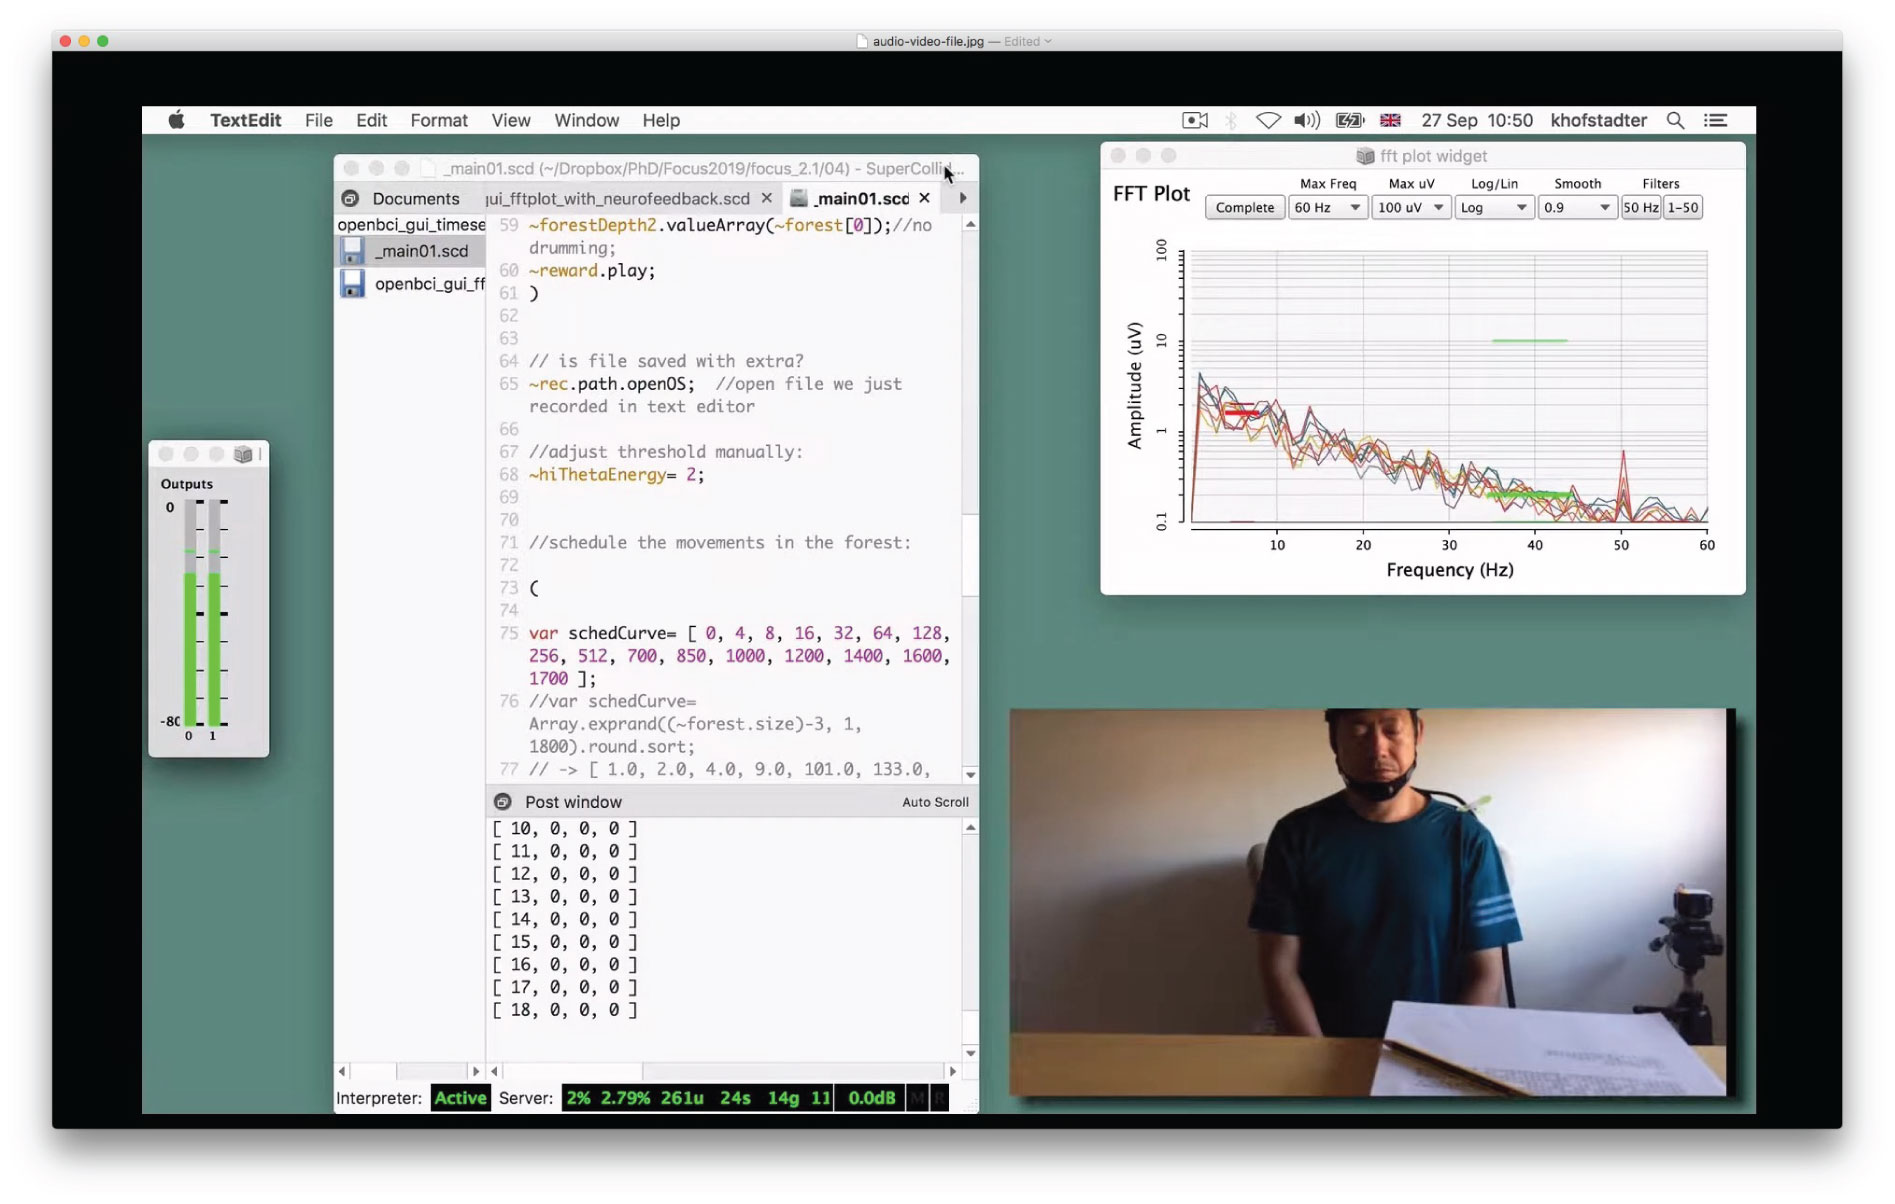 Snapshot of an NFT session's screencast showing three SuperCollider windows (from left: audio volume meter, IDE with textual programming/post window and FFT plot) and one camera window.